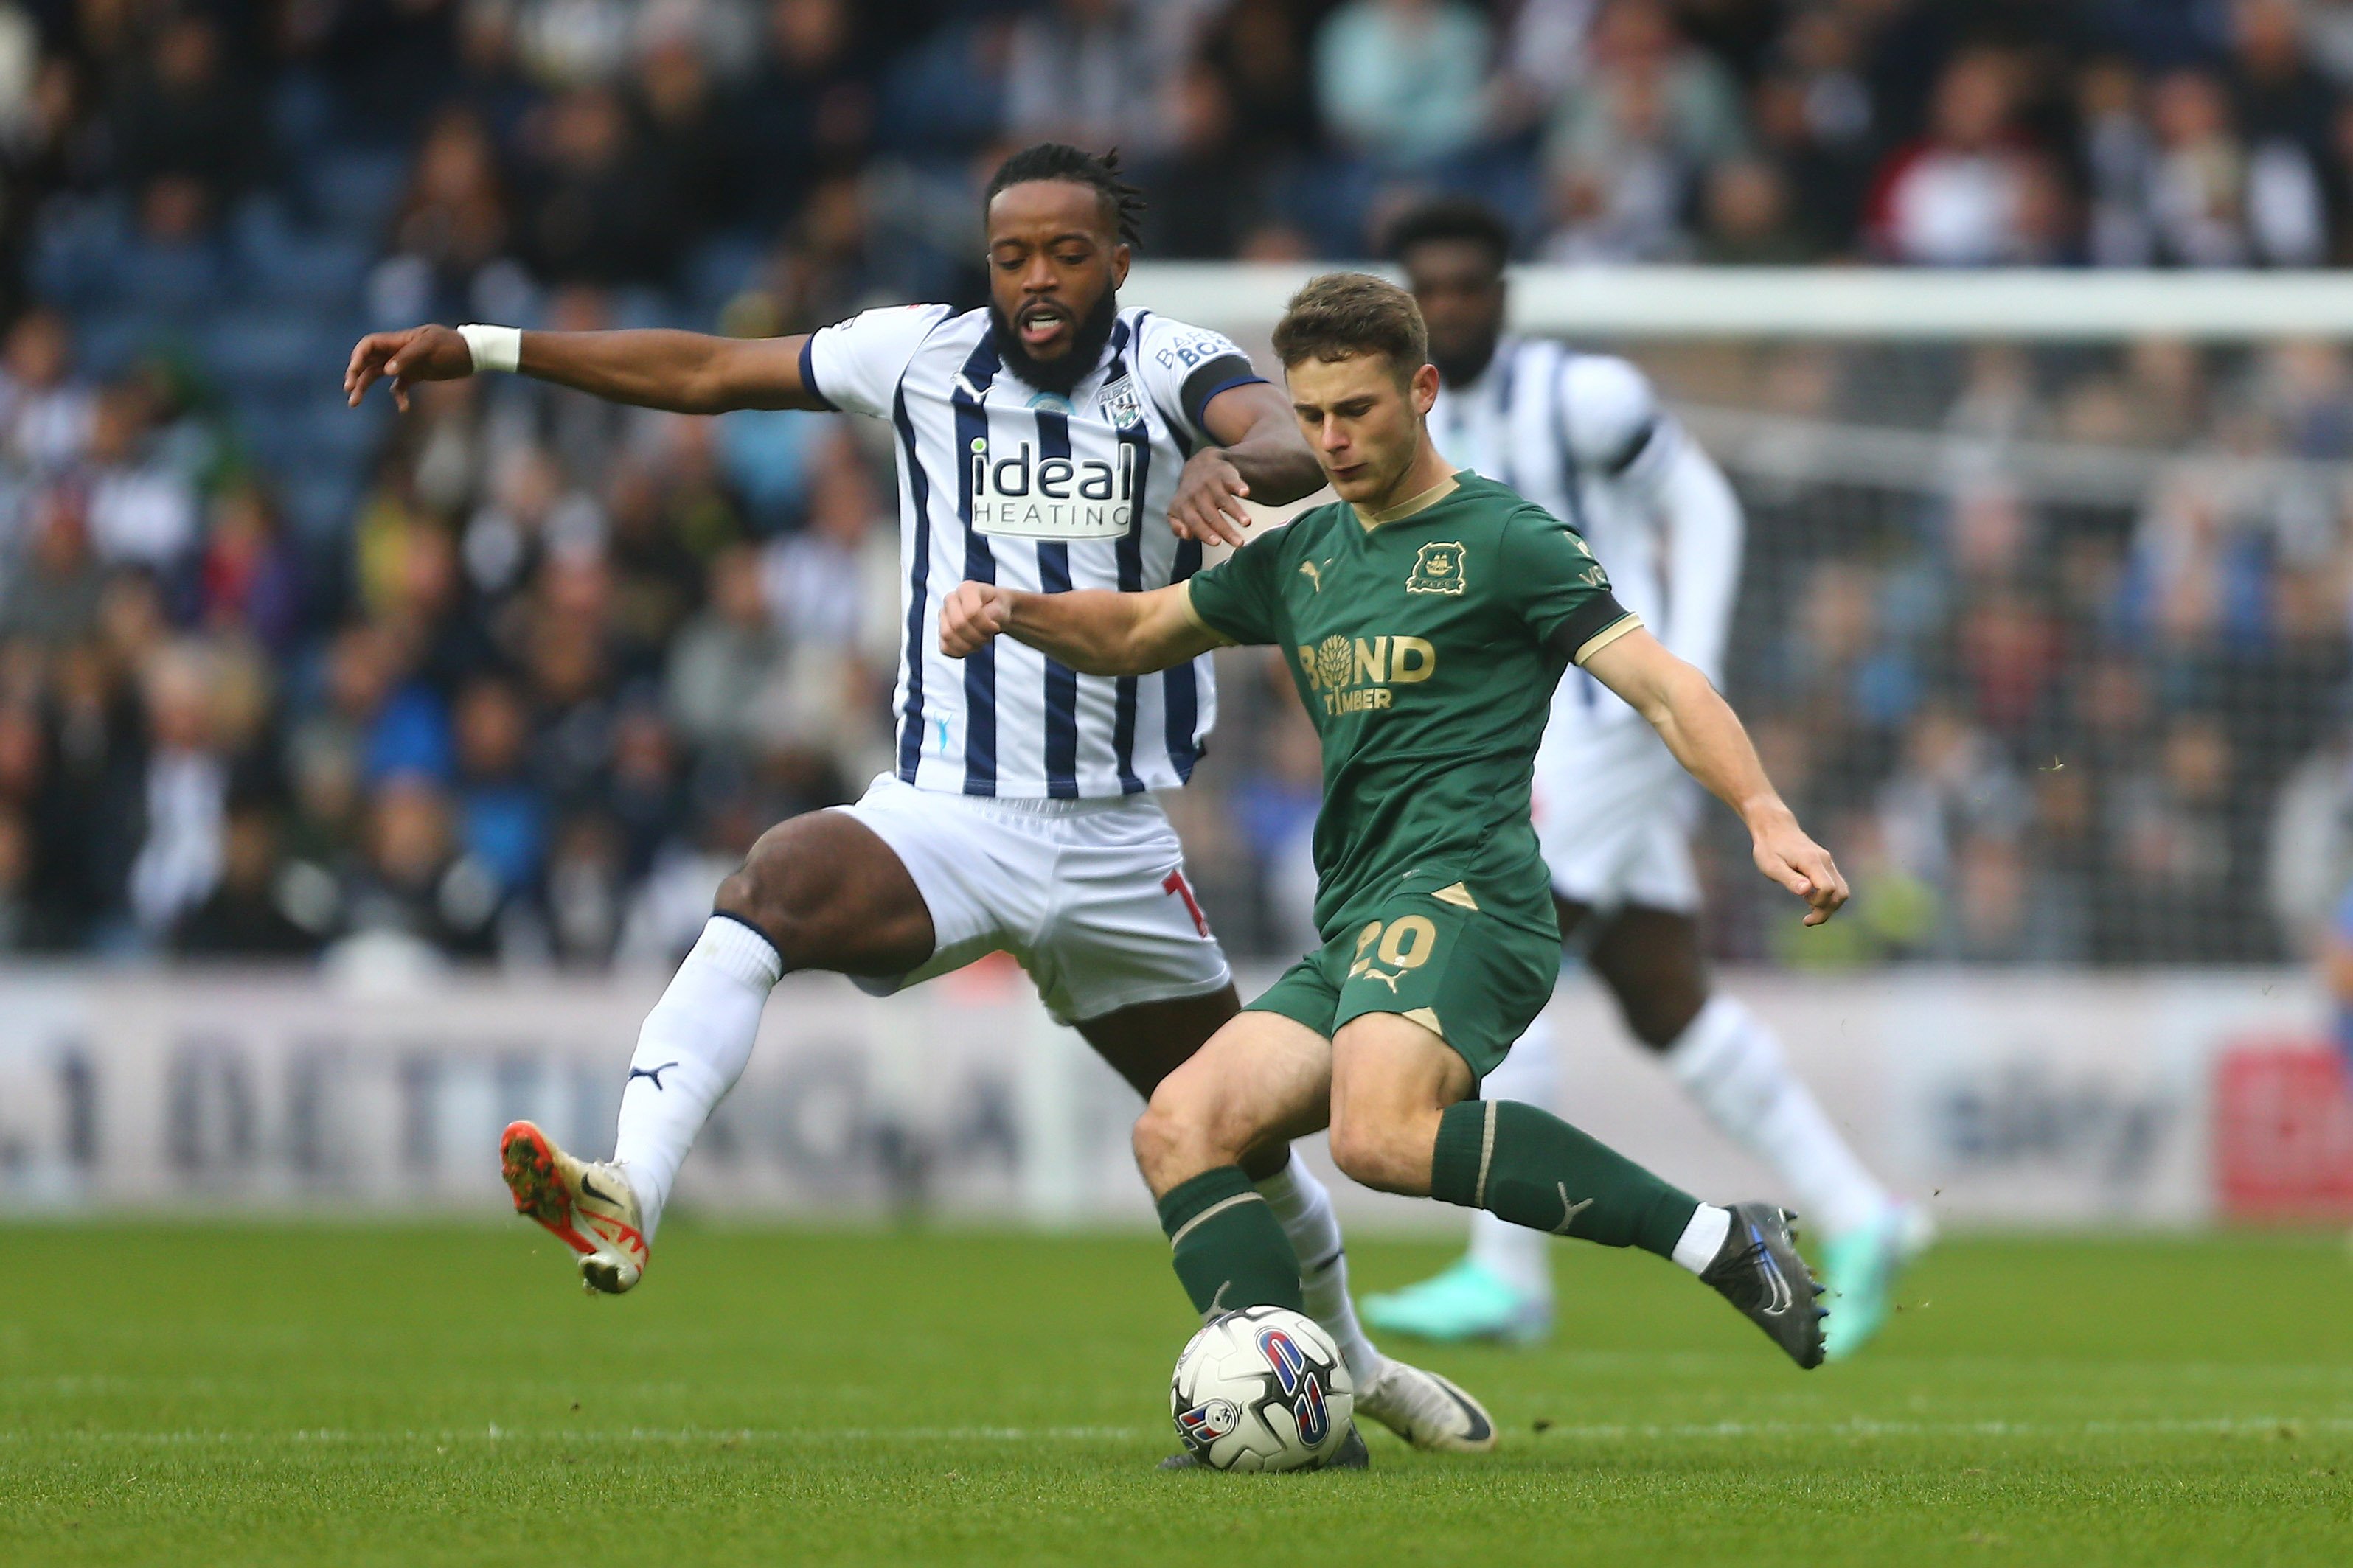 Nathaniel Chalobah attempting to win the ball against Plymouth at The Hawthorns